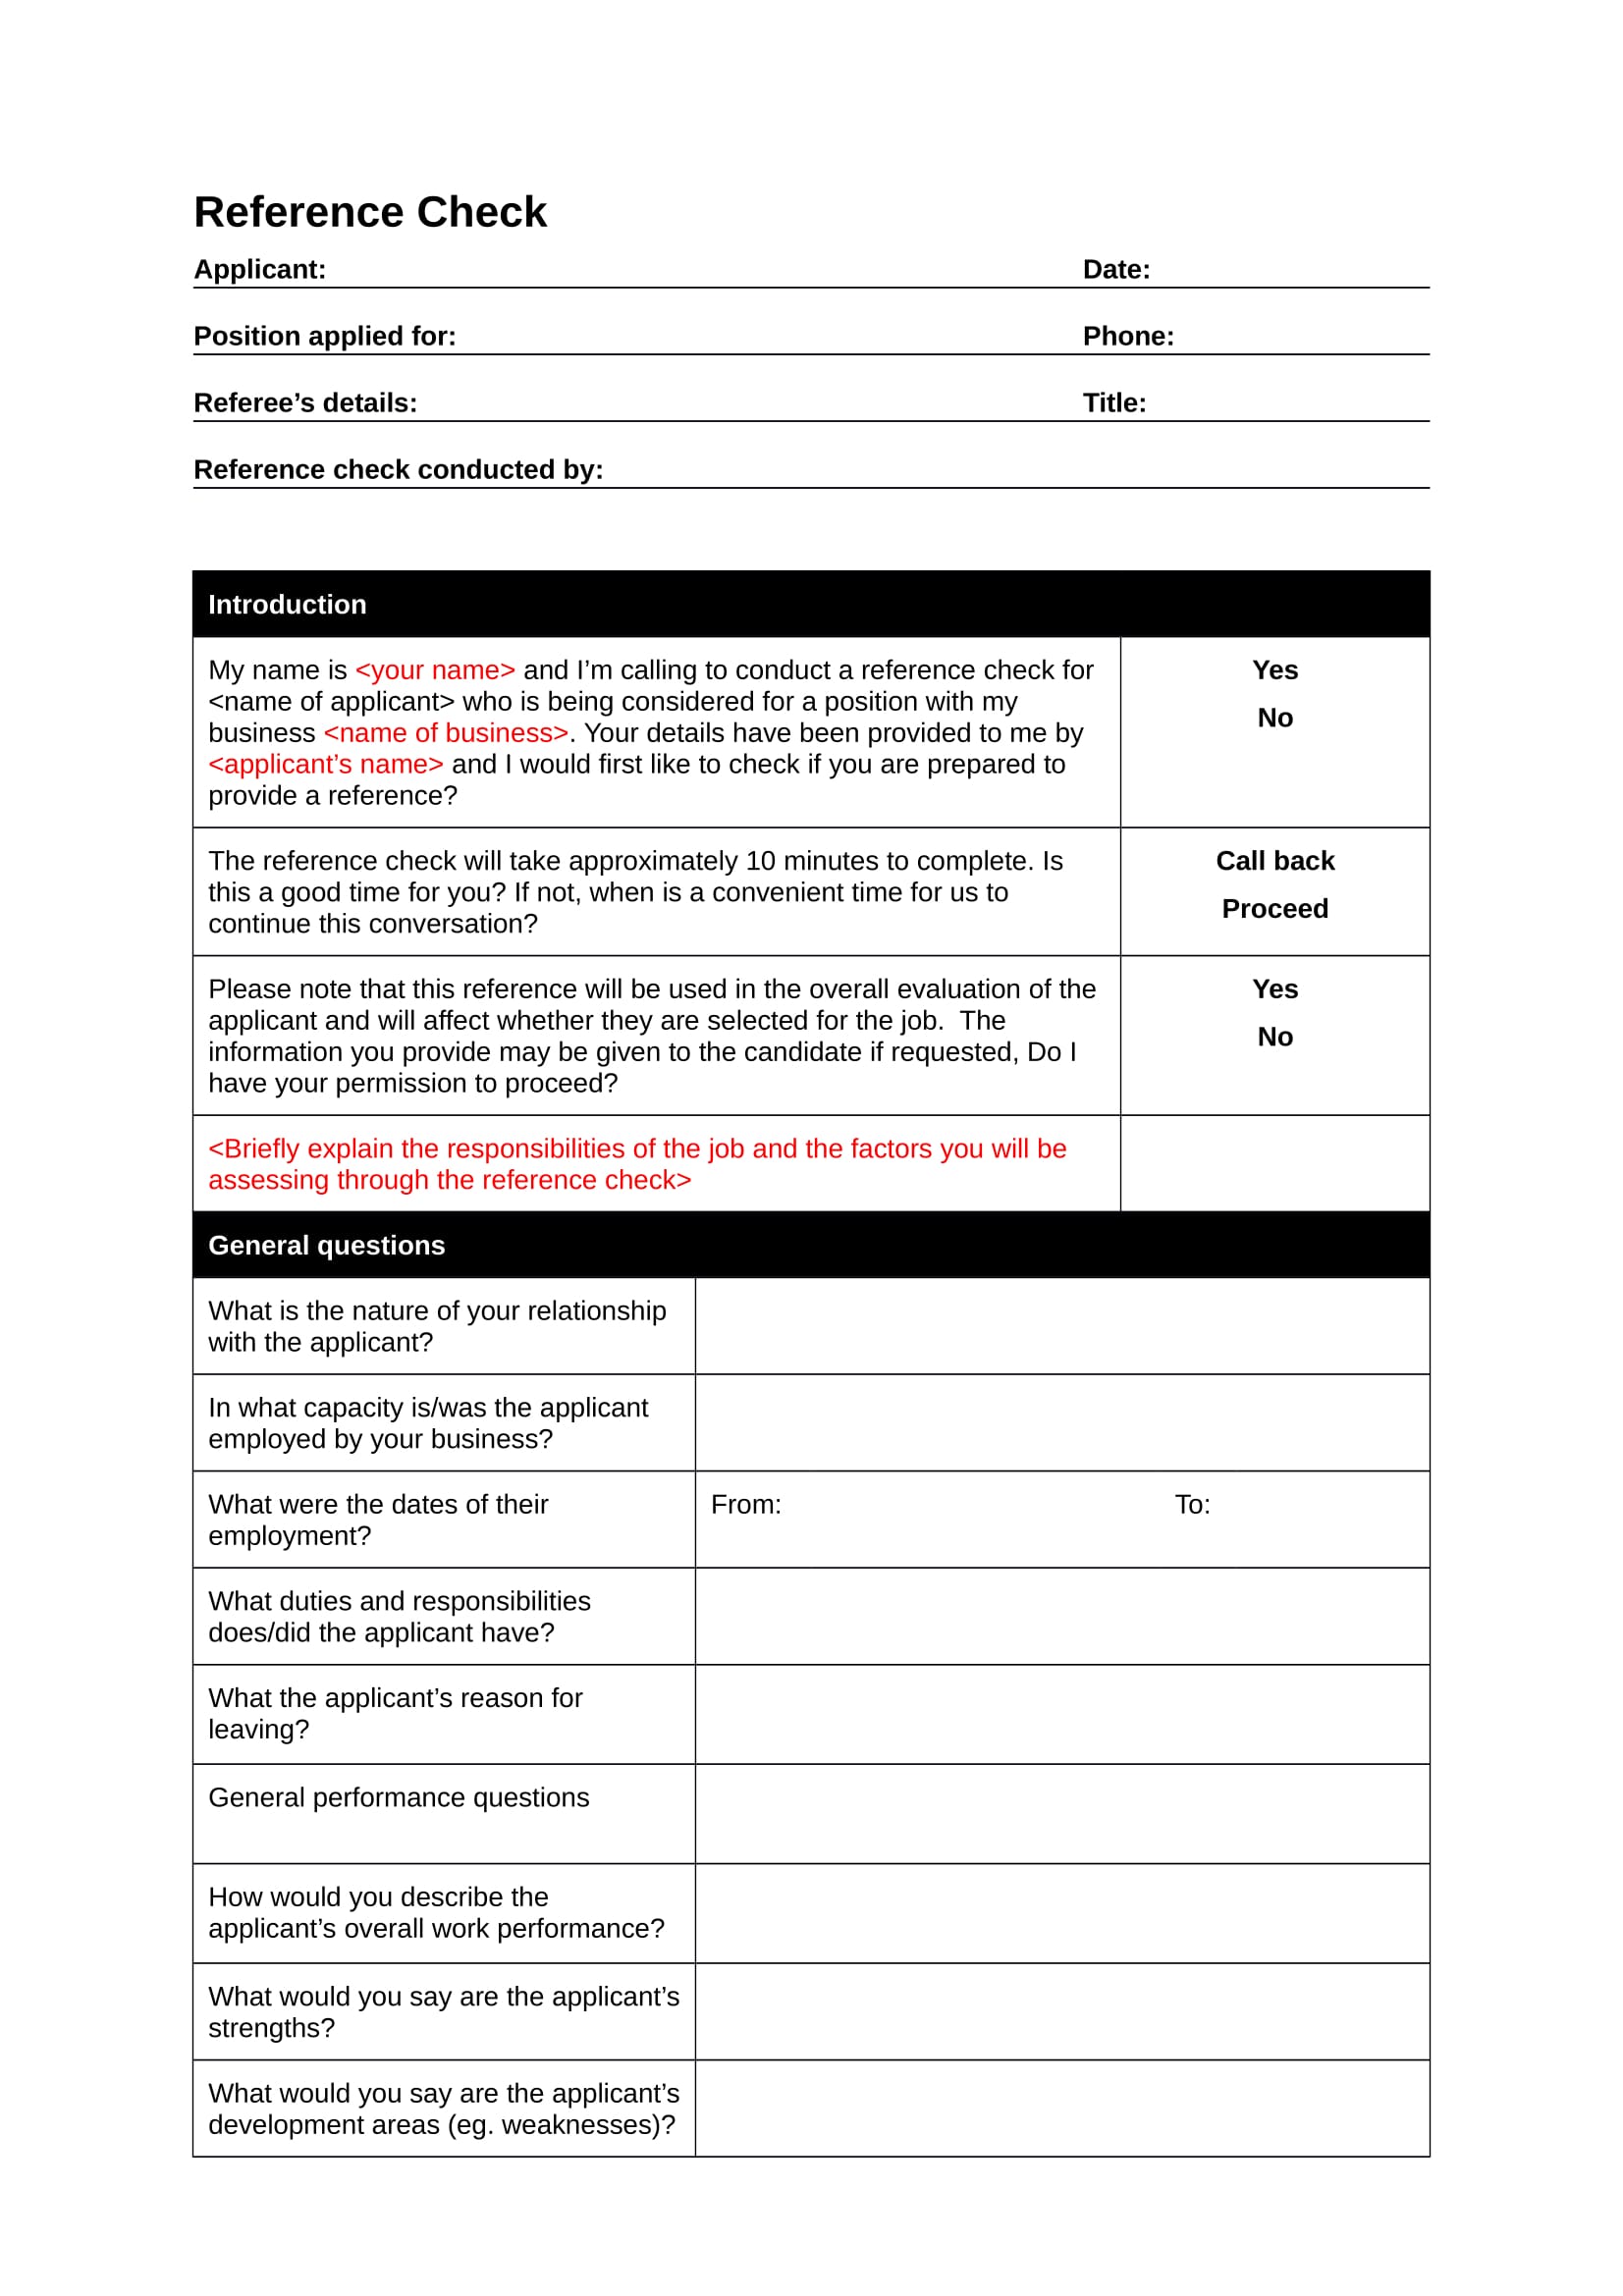 reference check form sample 2